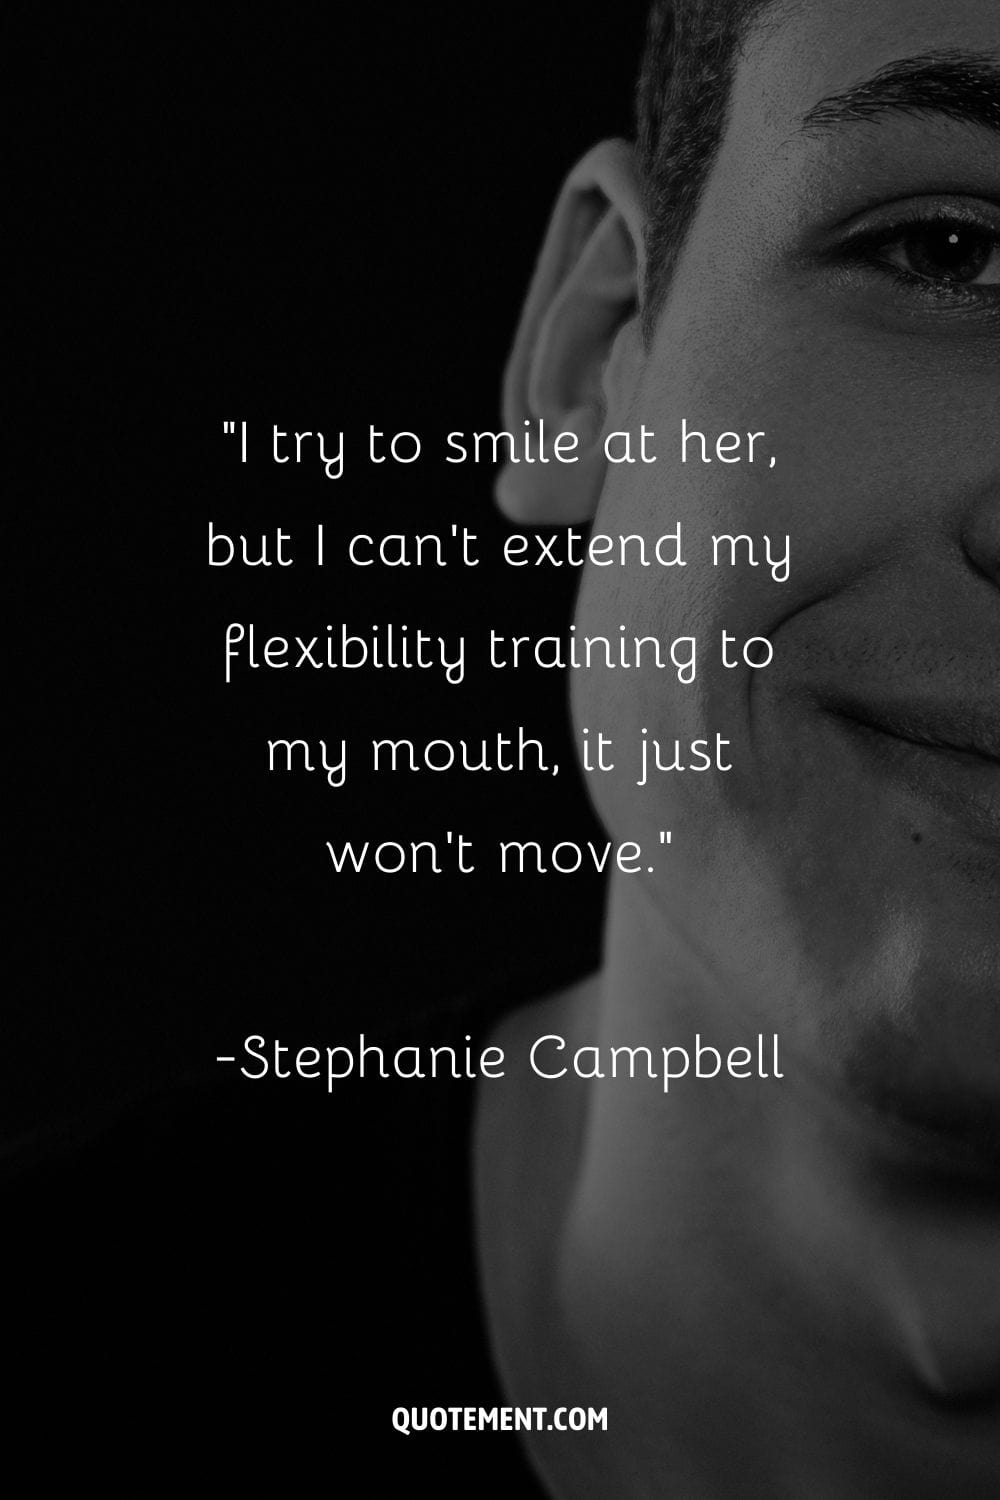 “I try to smile at her, but I can't extend my flexibility training to my mouth, it just won't move.” ― Stephanie Campbell, Grounding Quinn